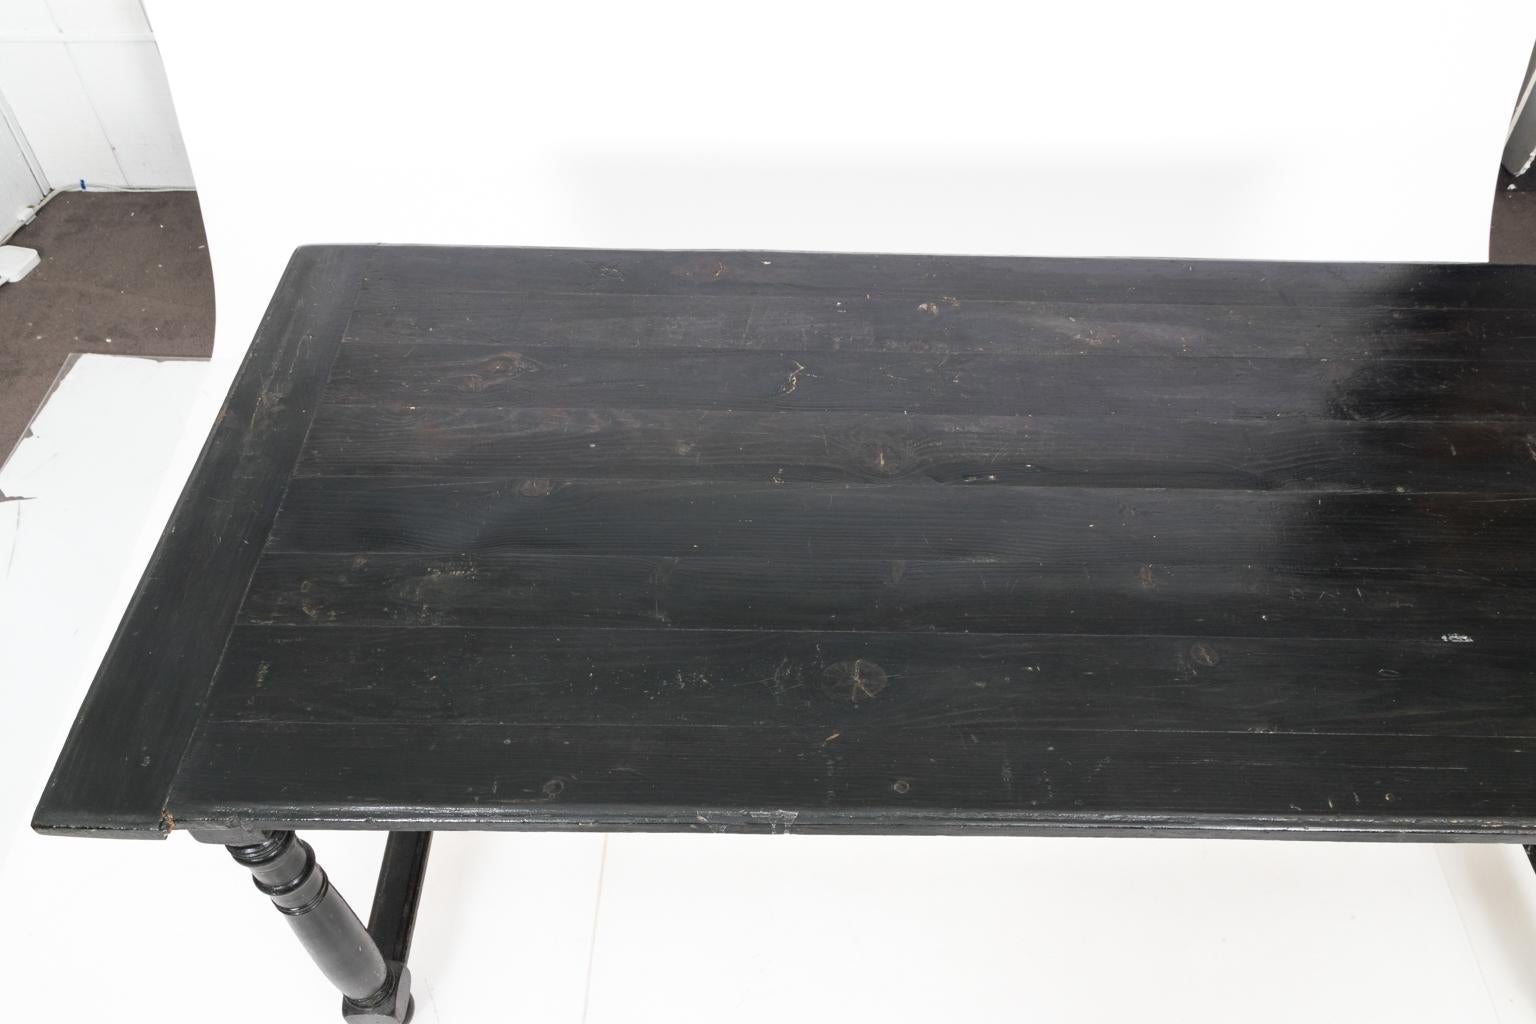 Black painted French country dining table with long H-shaped stretcher base and ring turned legs, circa 1870. Could also be used as a large flat top desk. Please note that this table has surface wear and scratches with age along with minor table